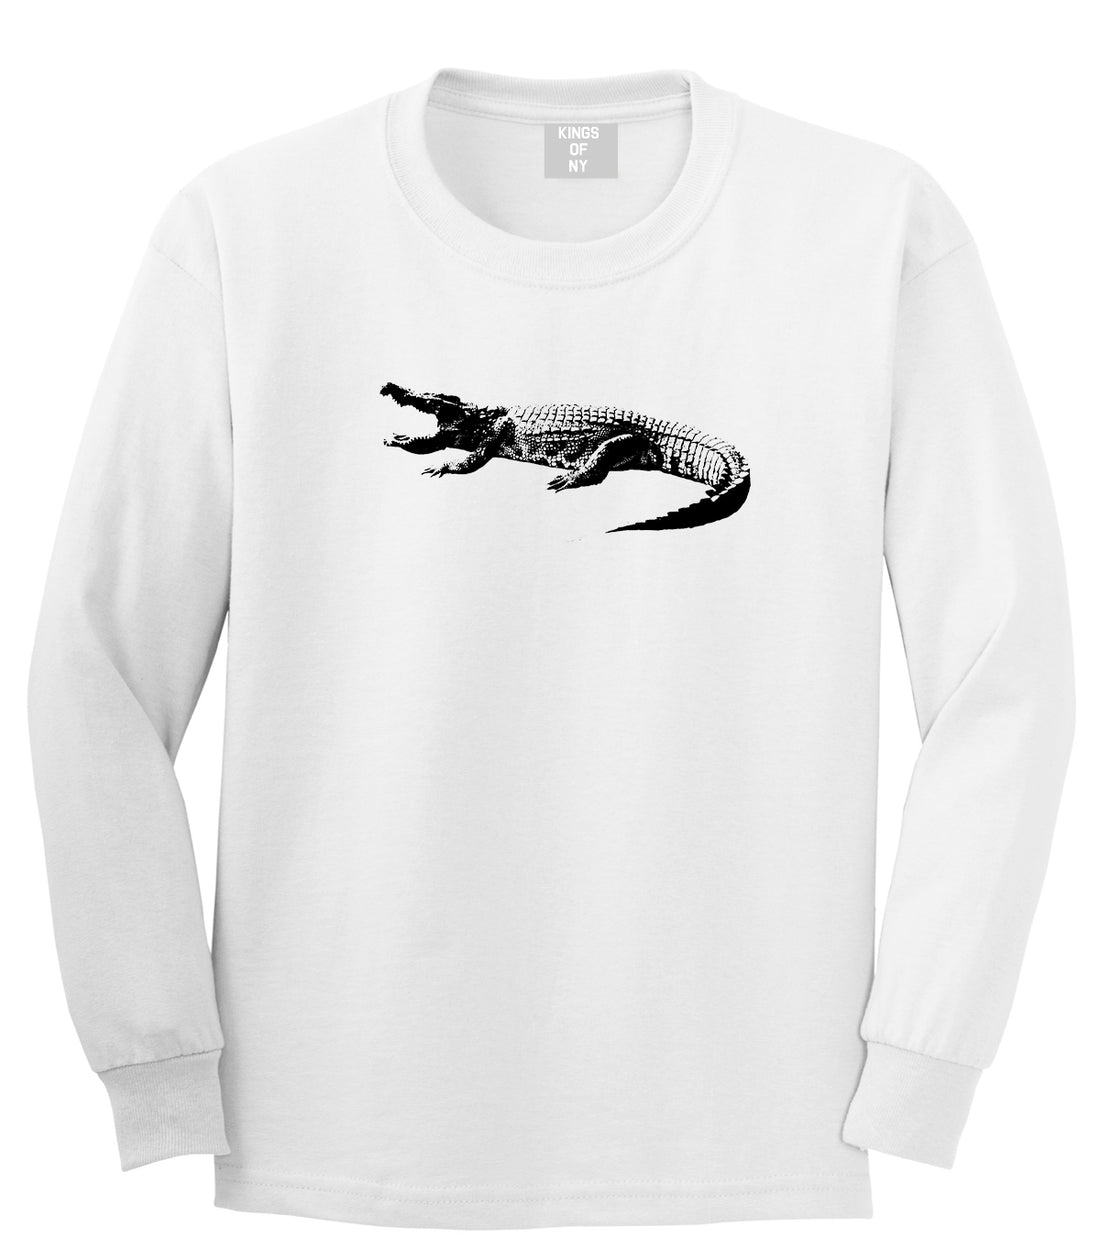 Alligator White Long Sleeve T-Shirt by Kings Of NY